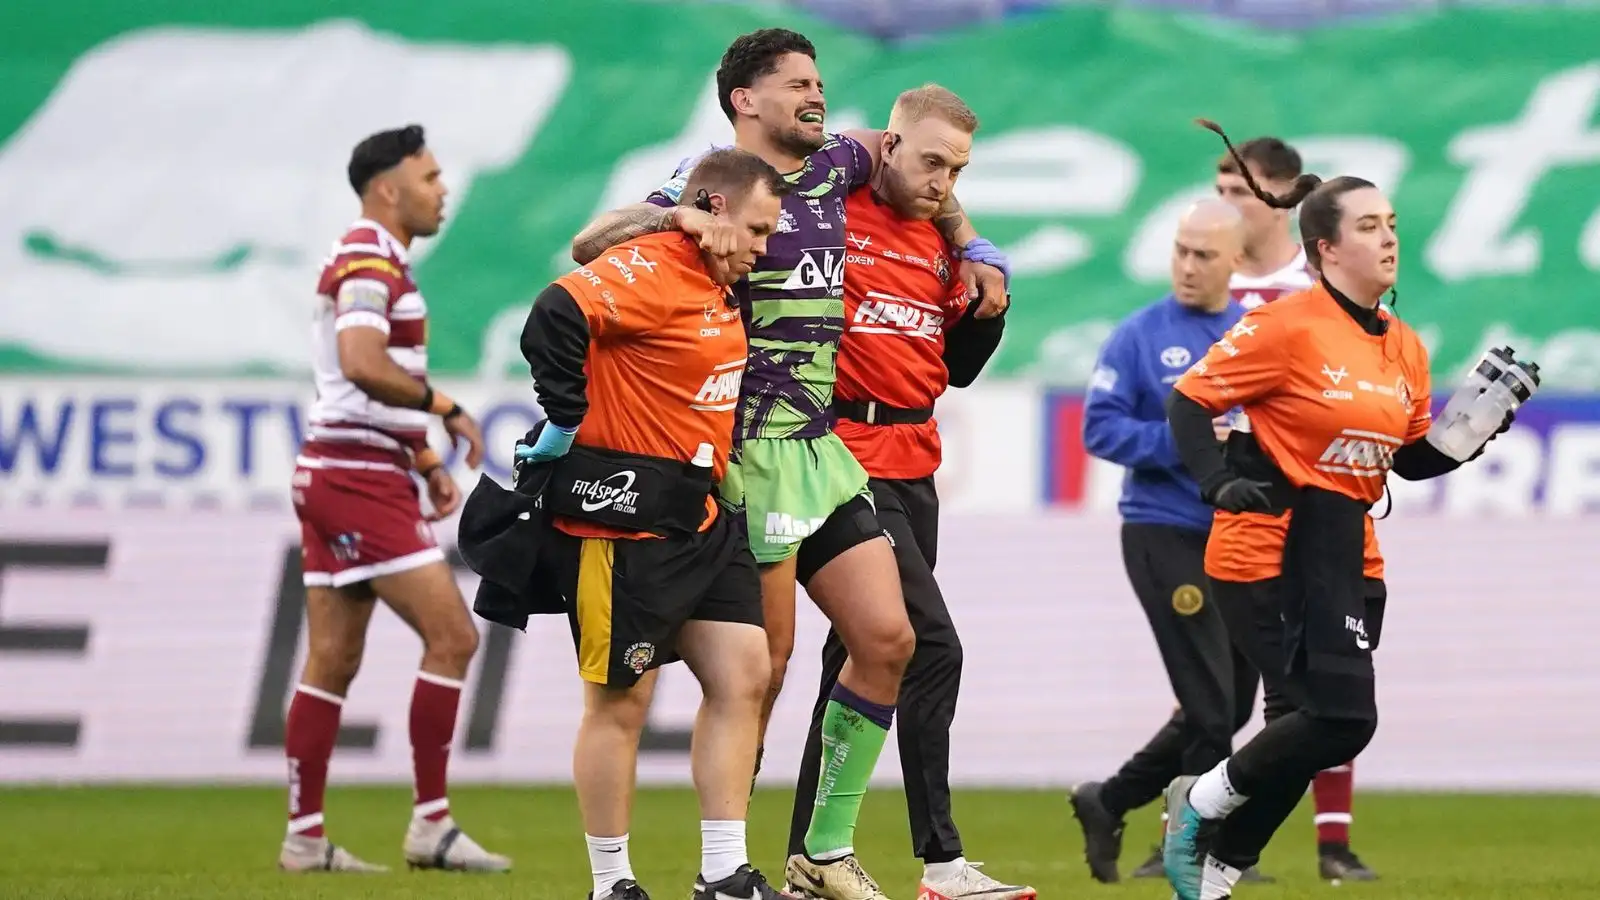 Charbel Tasipale injury latest as Castleford Tigers coach praises duo on debut